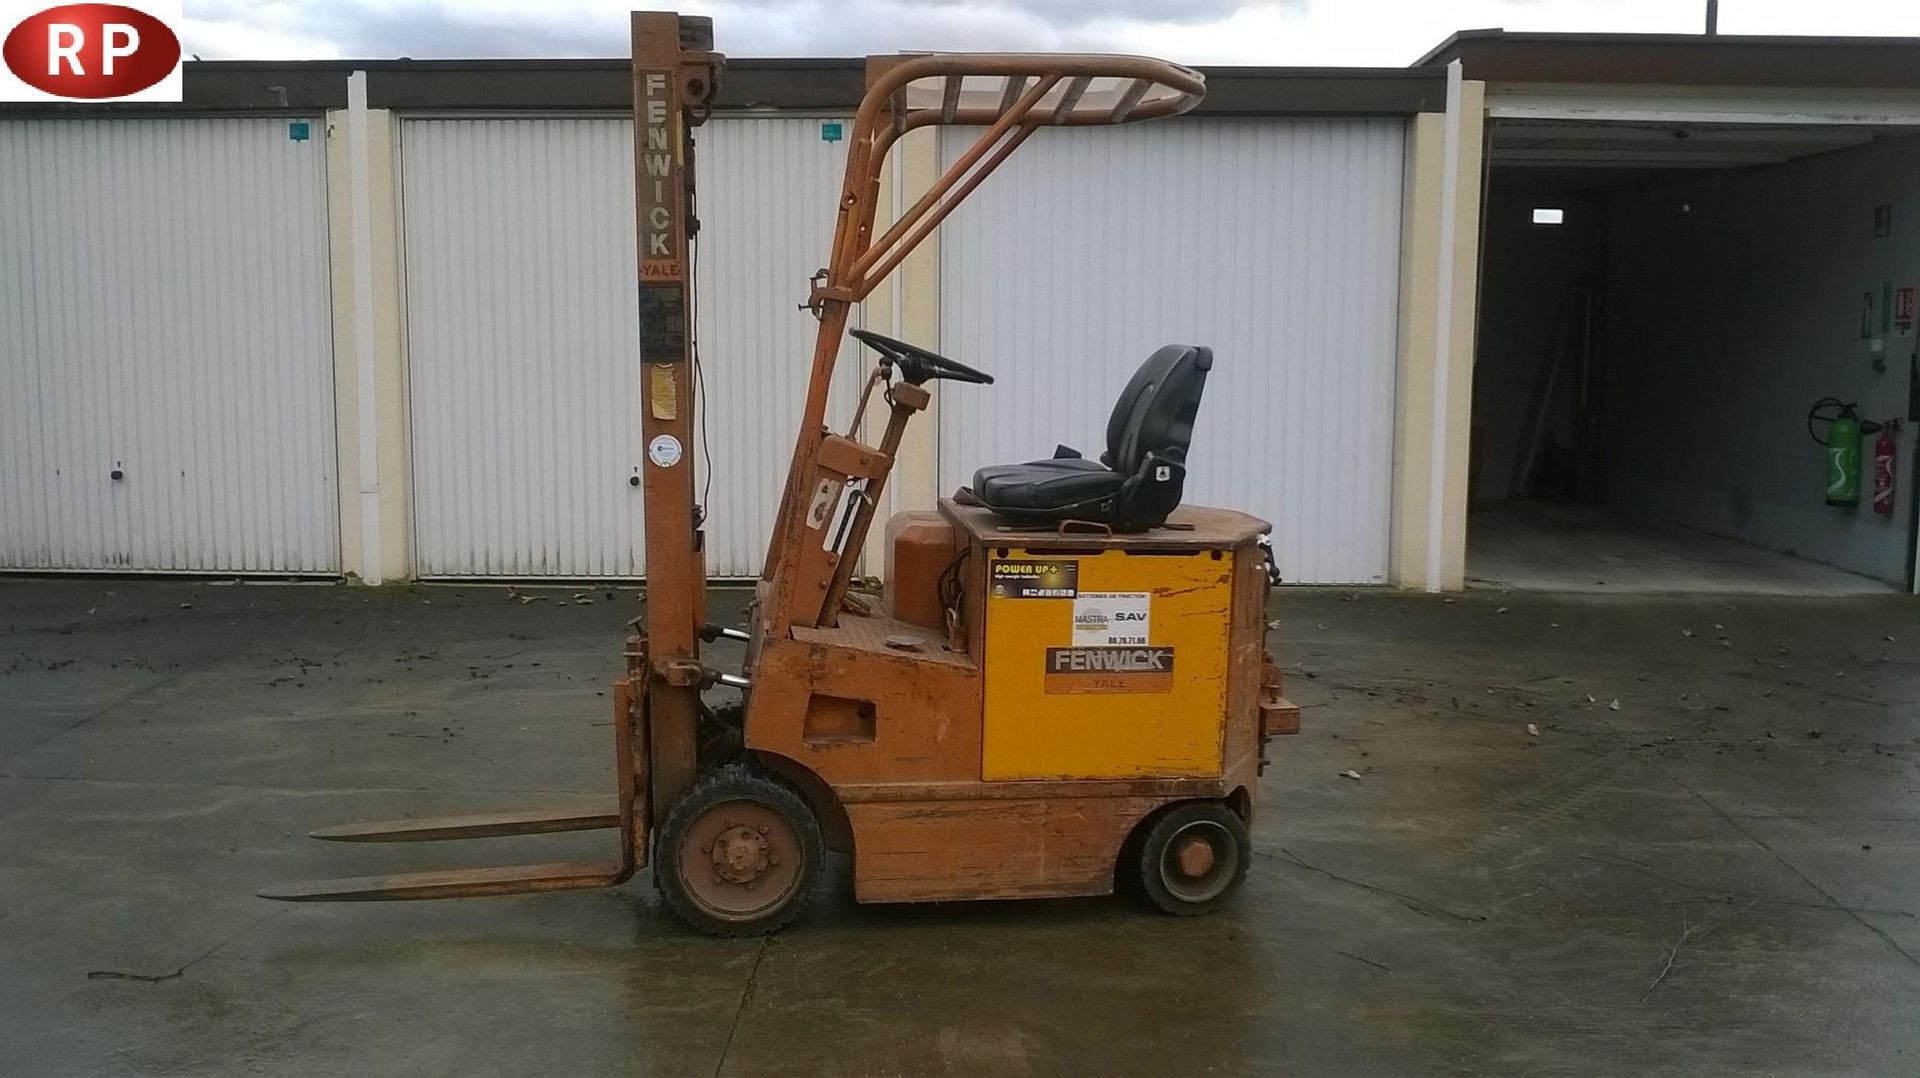 Null RP] [Professional only] FENWICK electric forklift, junior model 18PN90TB - &hellip;